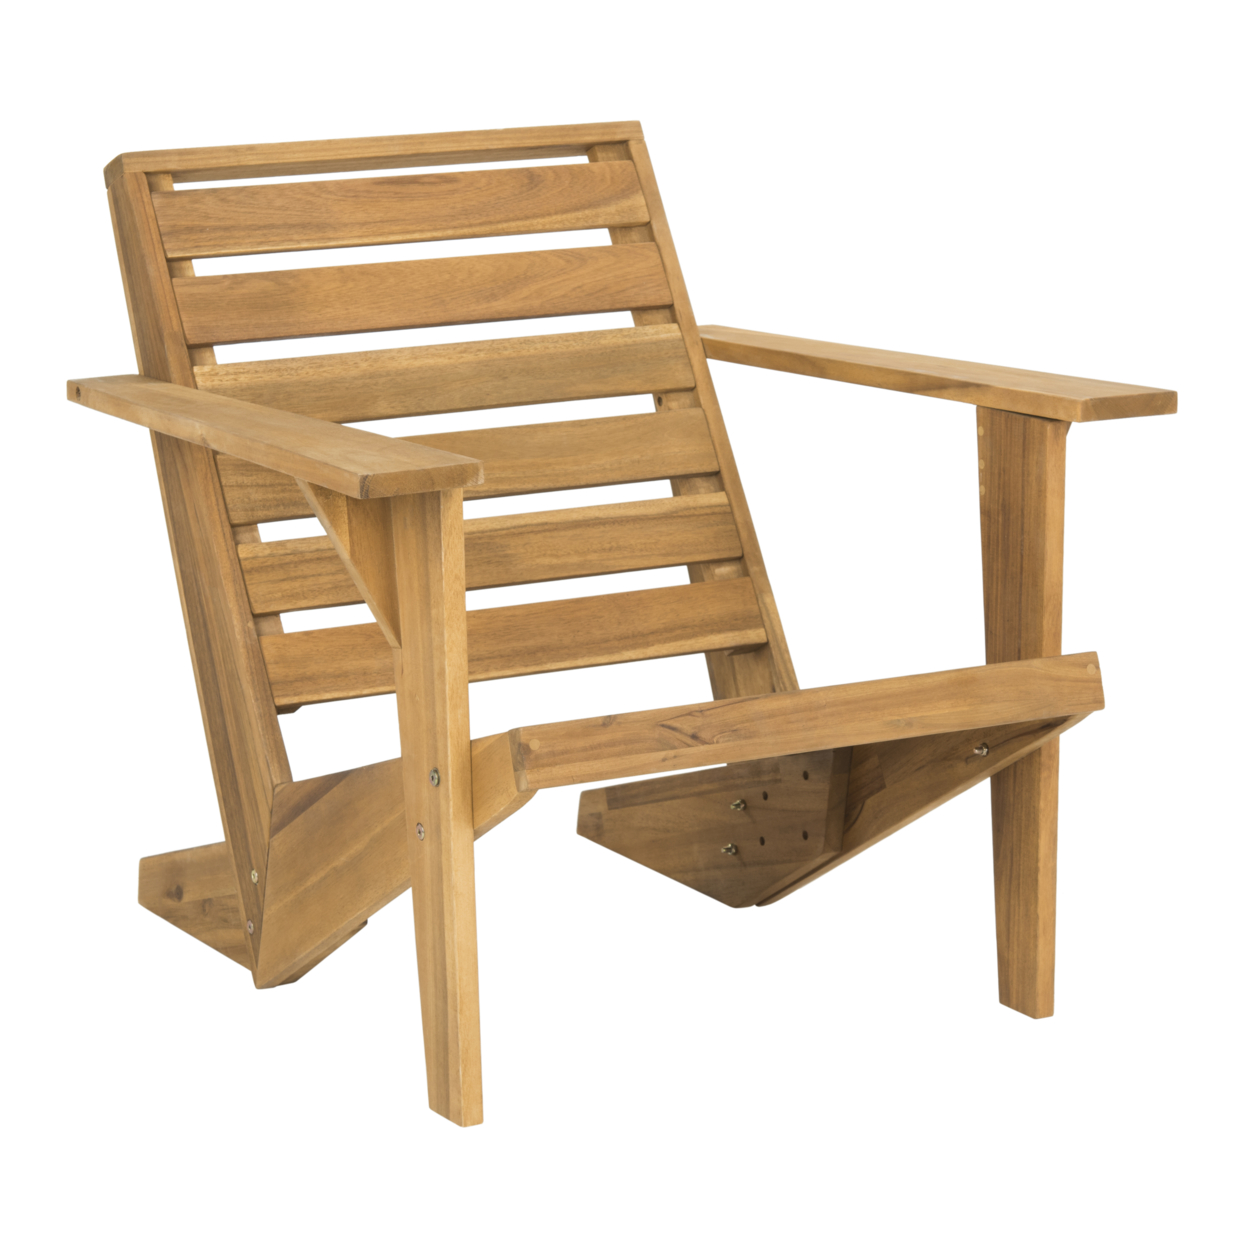 SAFAVIEH Outdoor Collection Lanty Adirondack Chair Natural